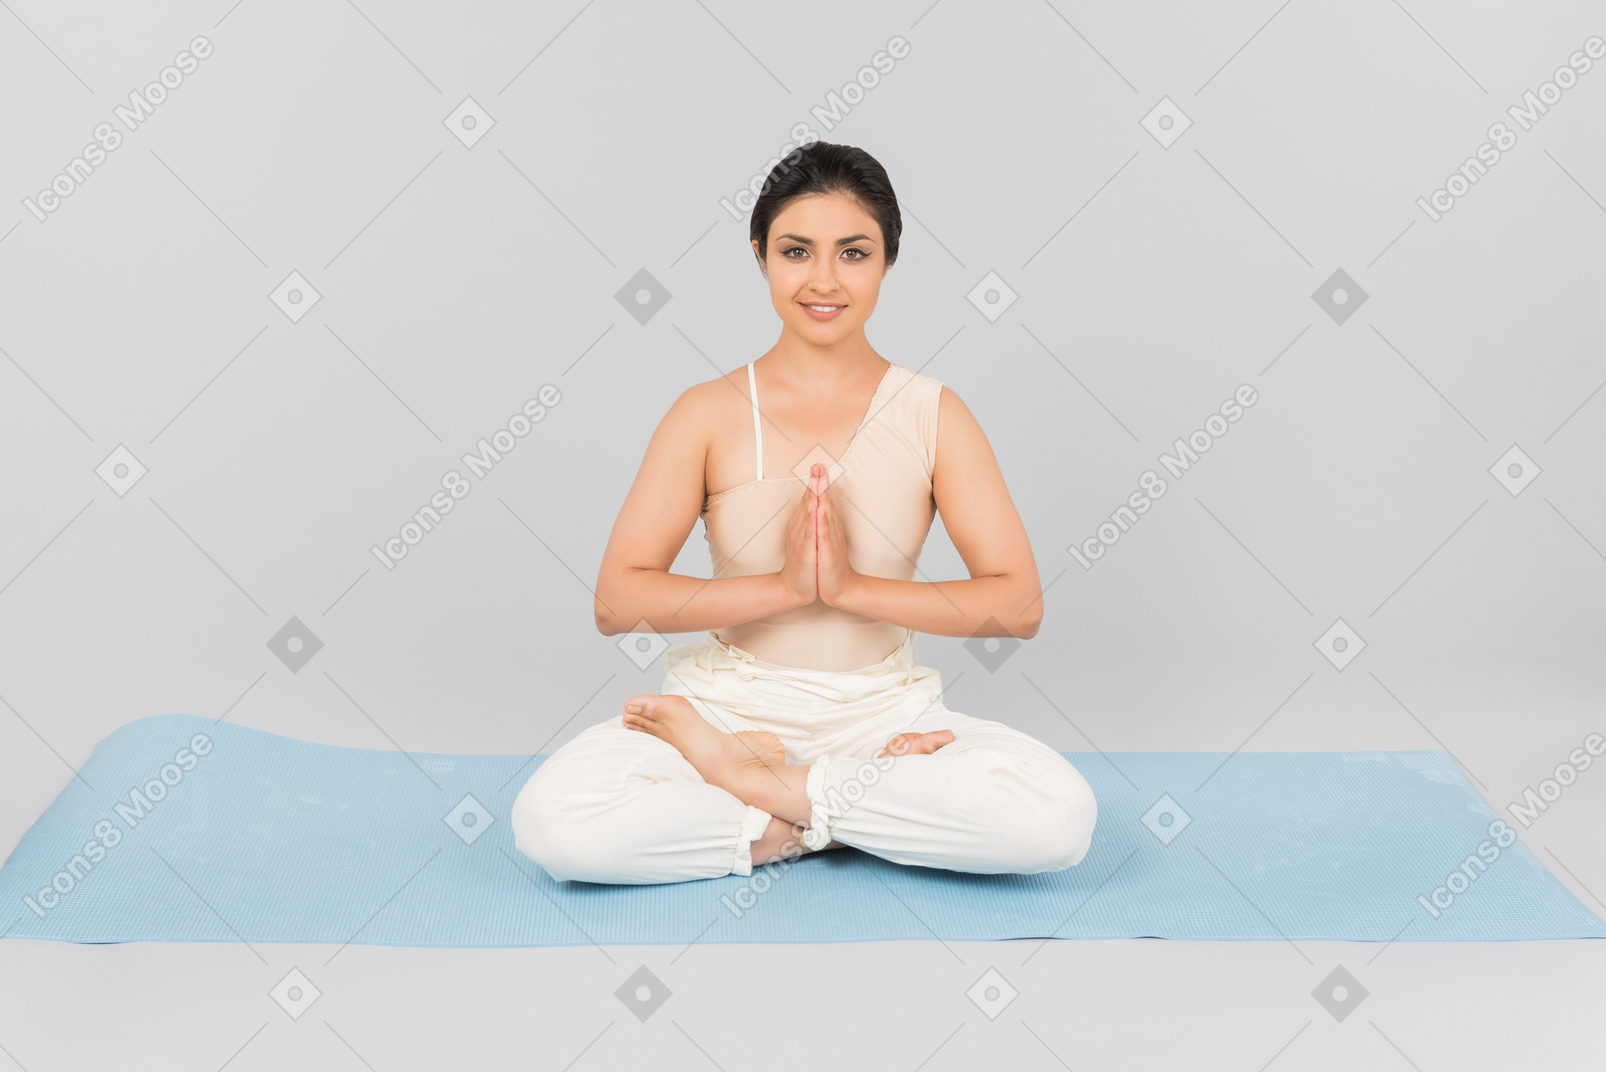 Young indian woman with legs crossed and hands folded sitting on yoga mat